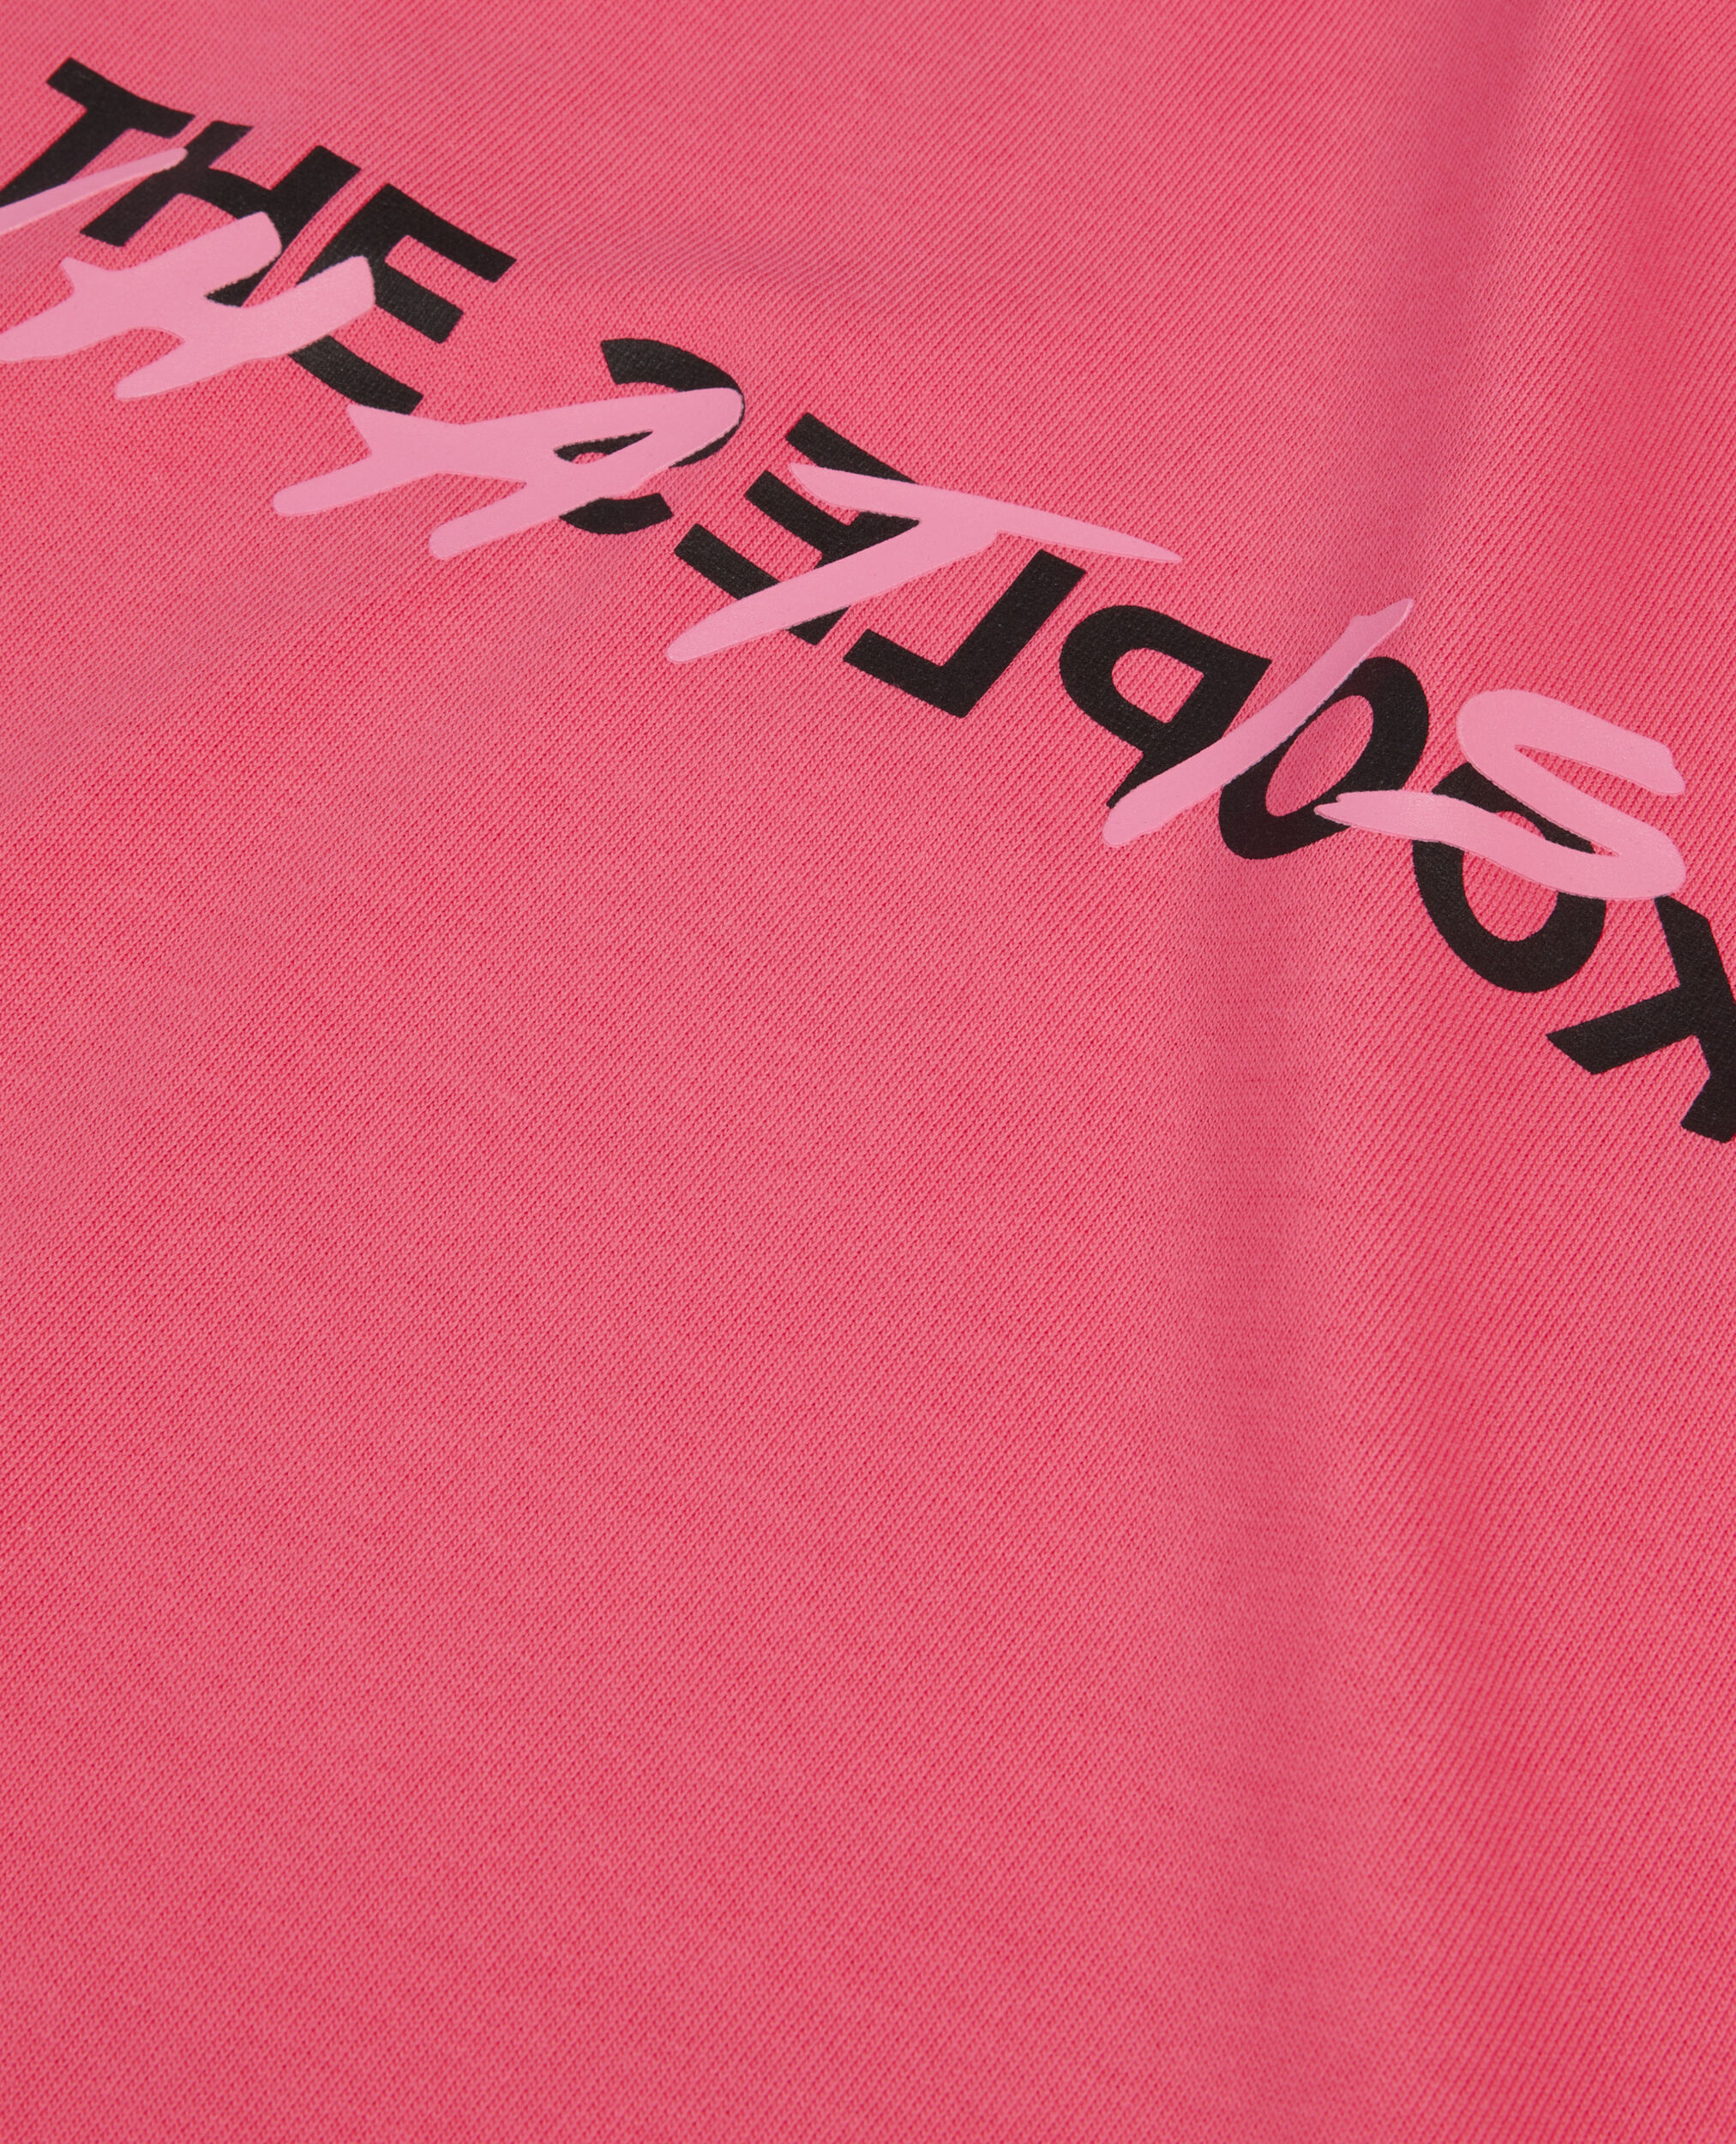 T-shirt "Was ist" fuchsia, RETRO PINK, hi-res image number null